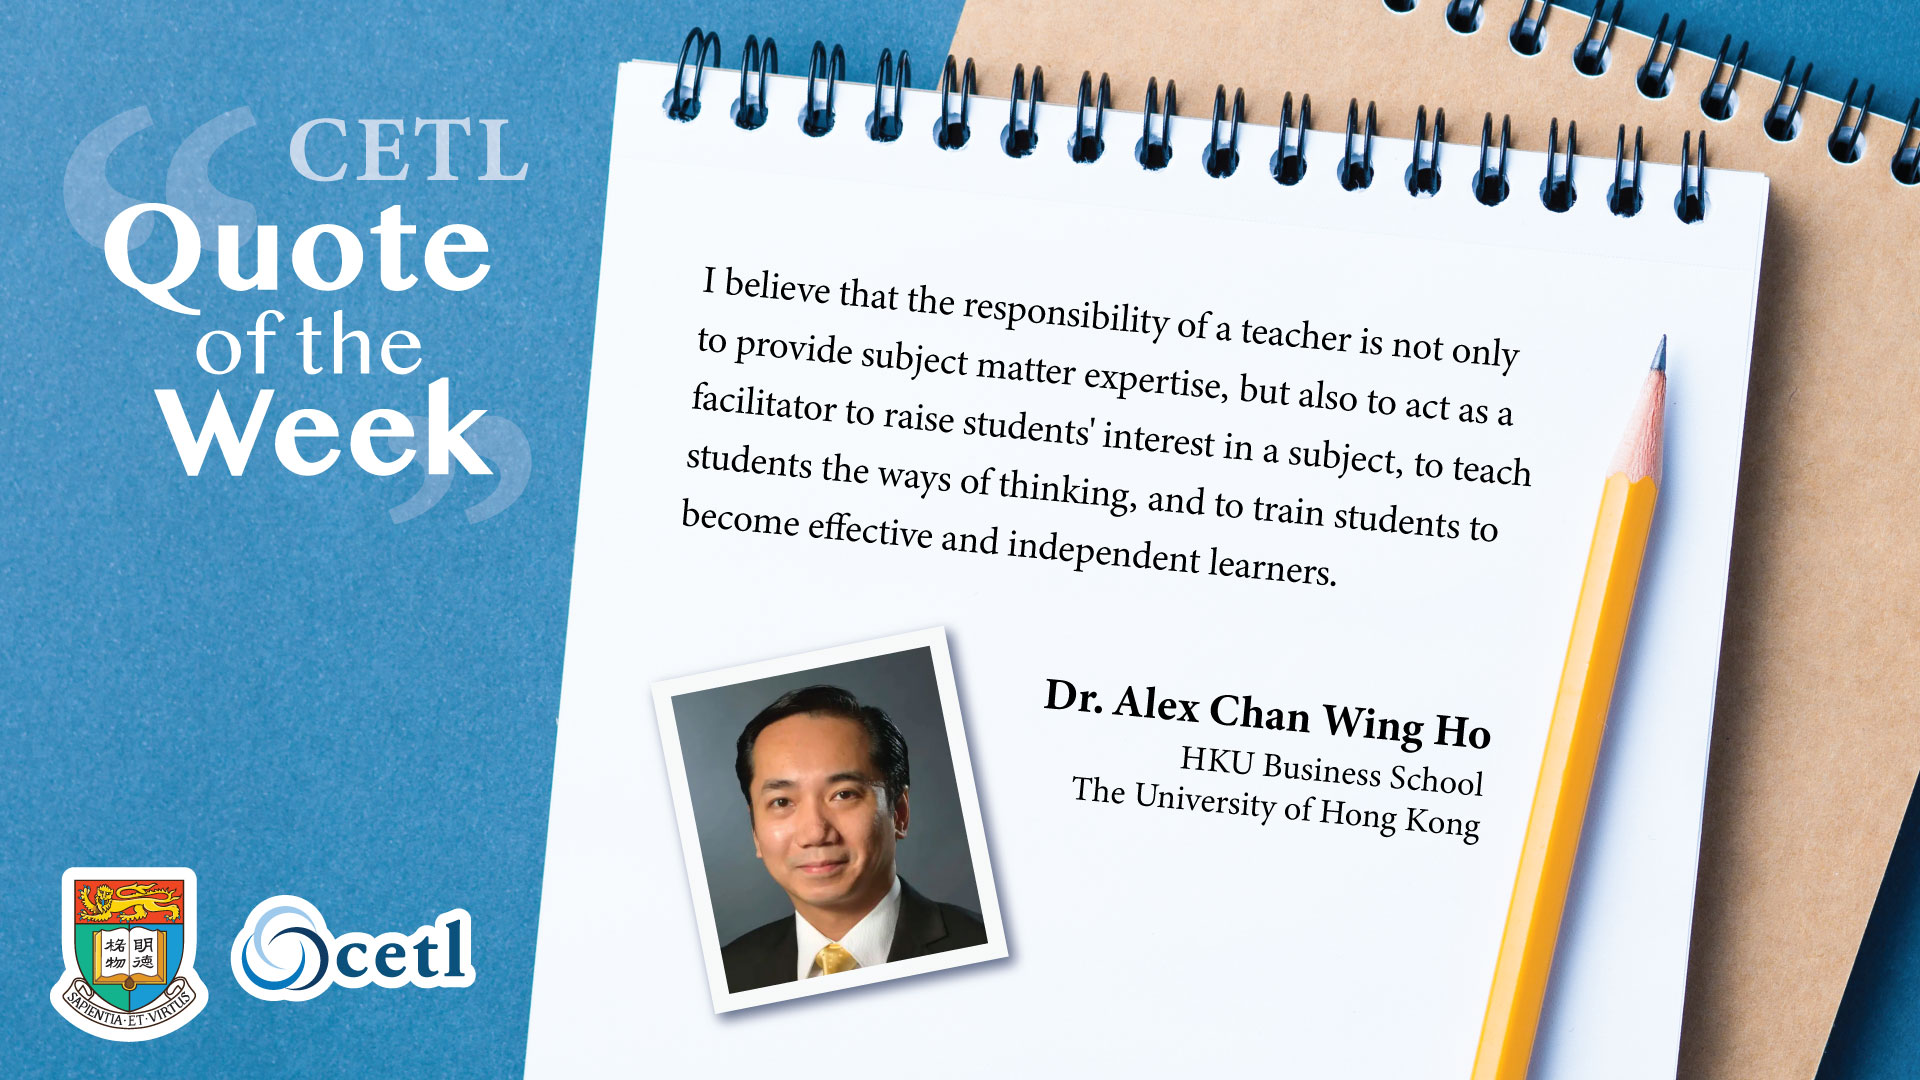 Dr. Alex Chan Wing Ho - I believe that the responsibility of a teacher is not only to provide subject matter expertise, but also to act as a facilitator to raise students' interest in a subject, to teach students the ways of thinking, and to train students to become effective and independent learners.